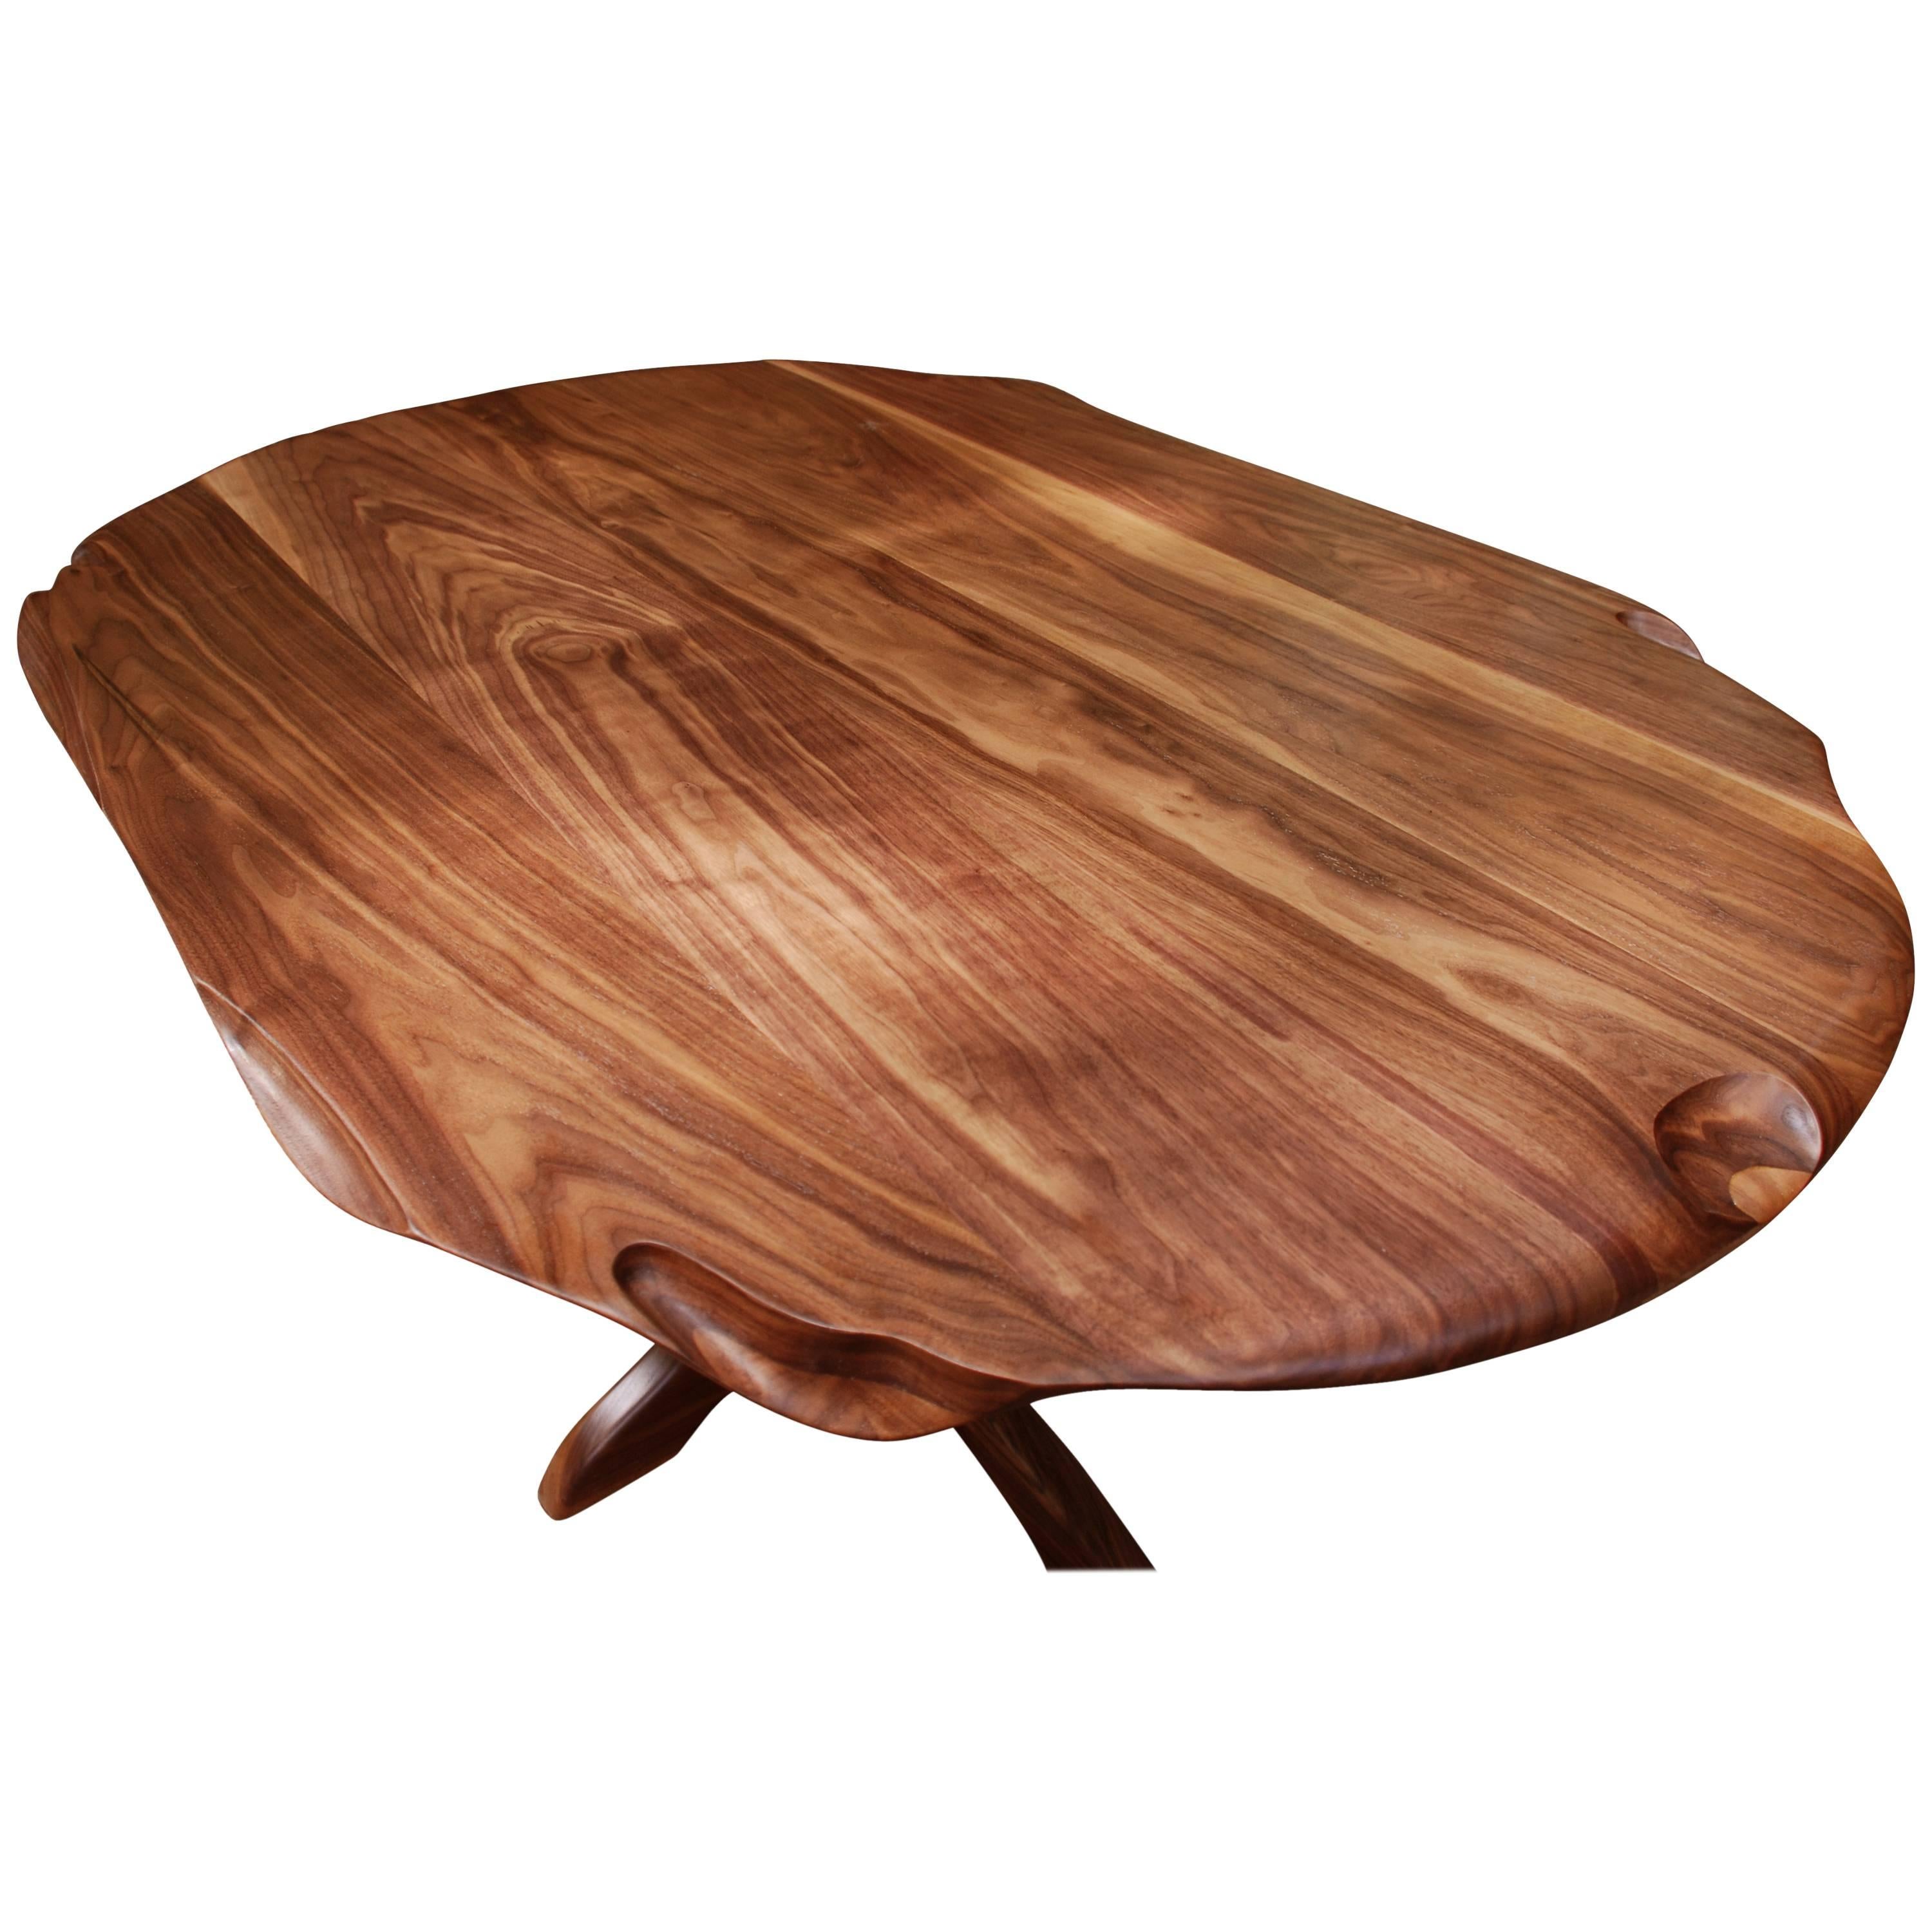 "Tutu" Breakfast Table by Michael Coffey, Designed 2011 For Sale